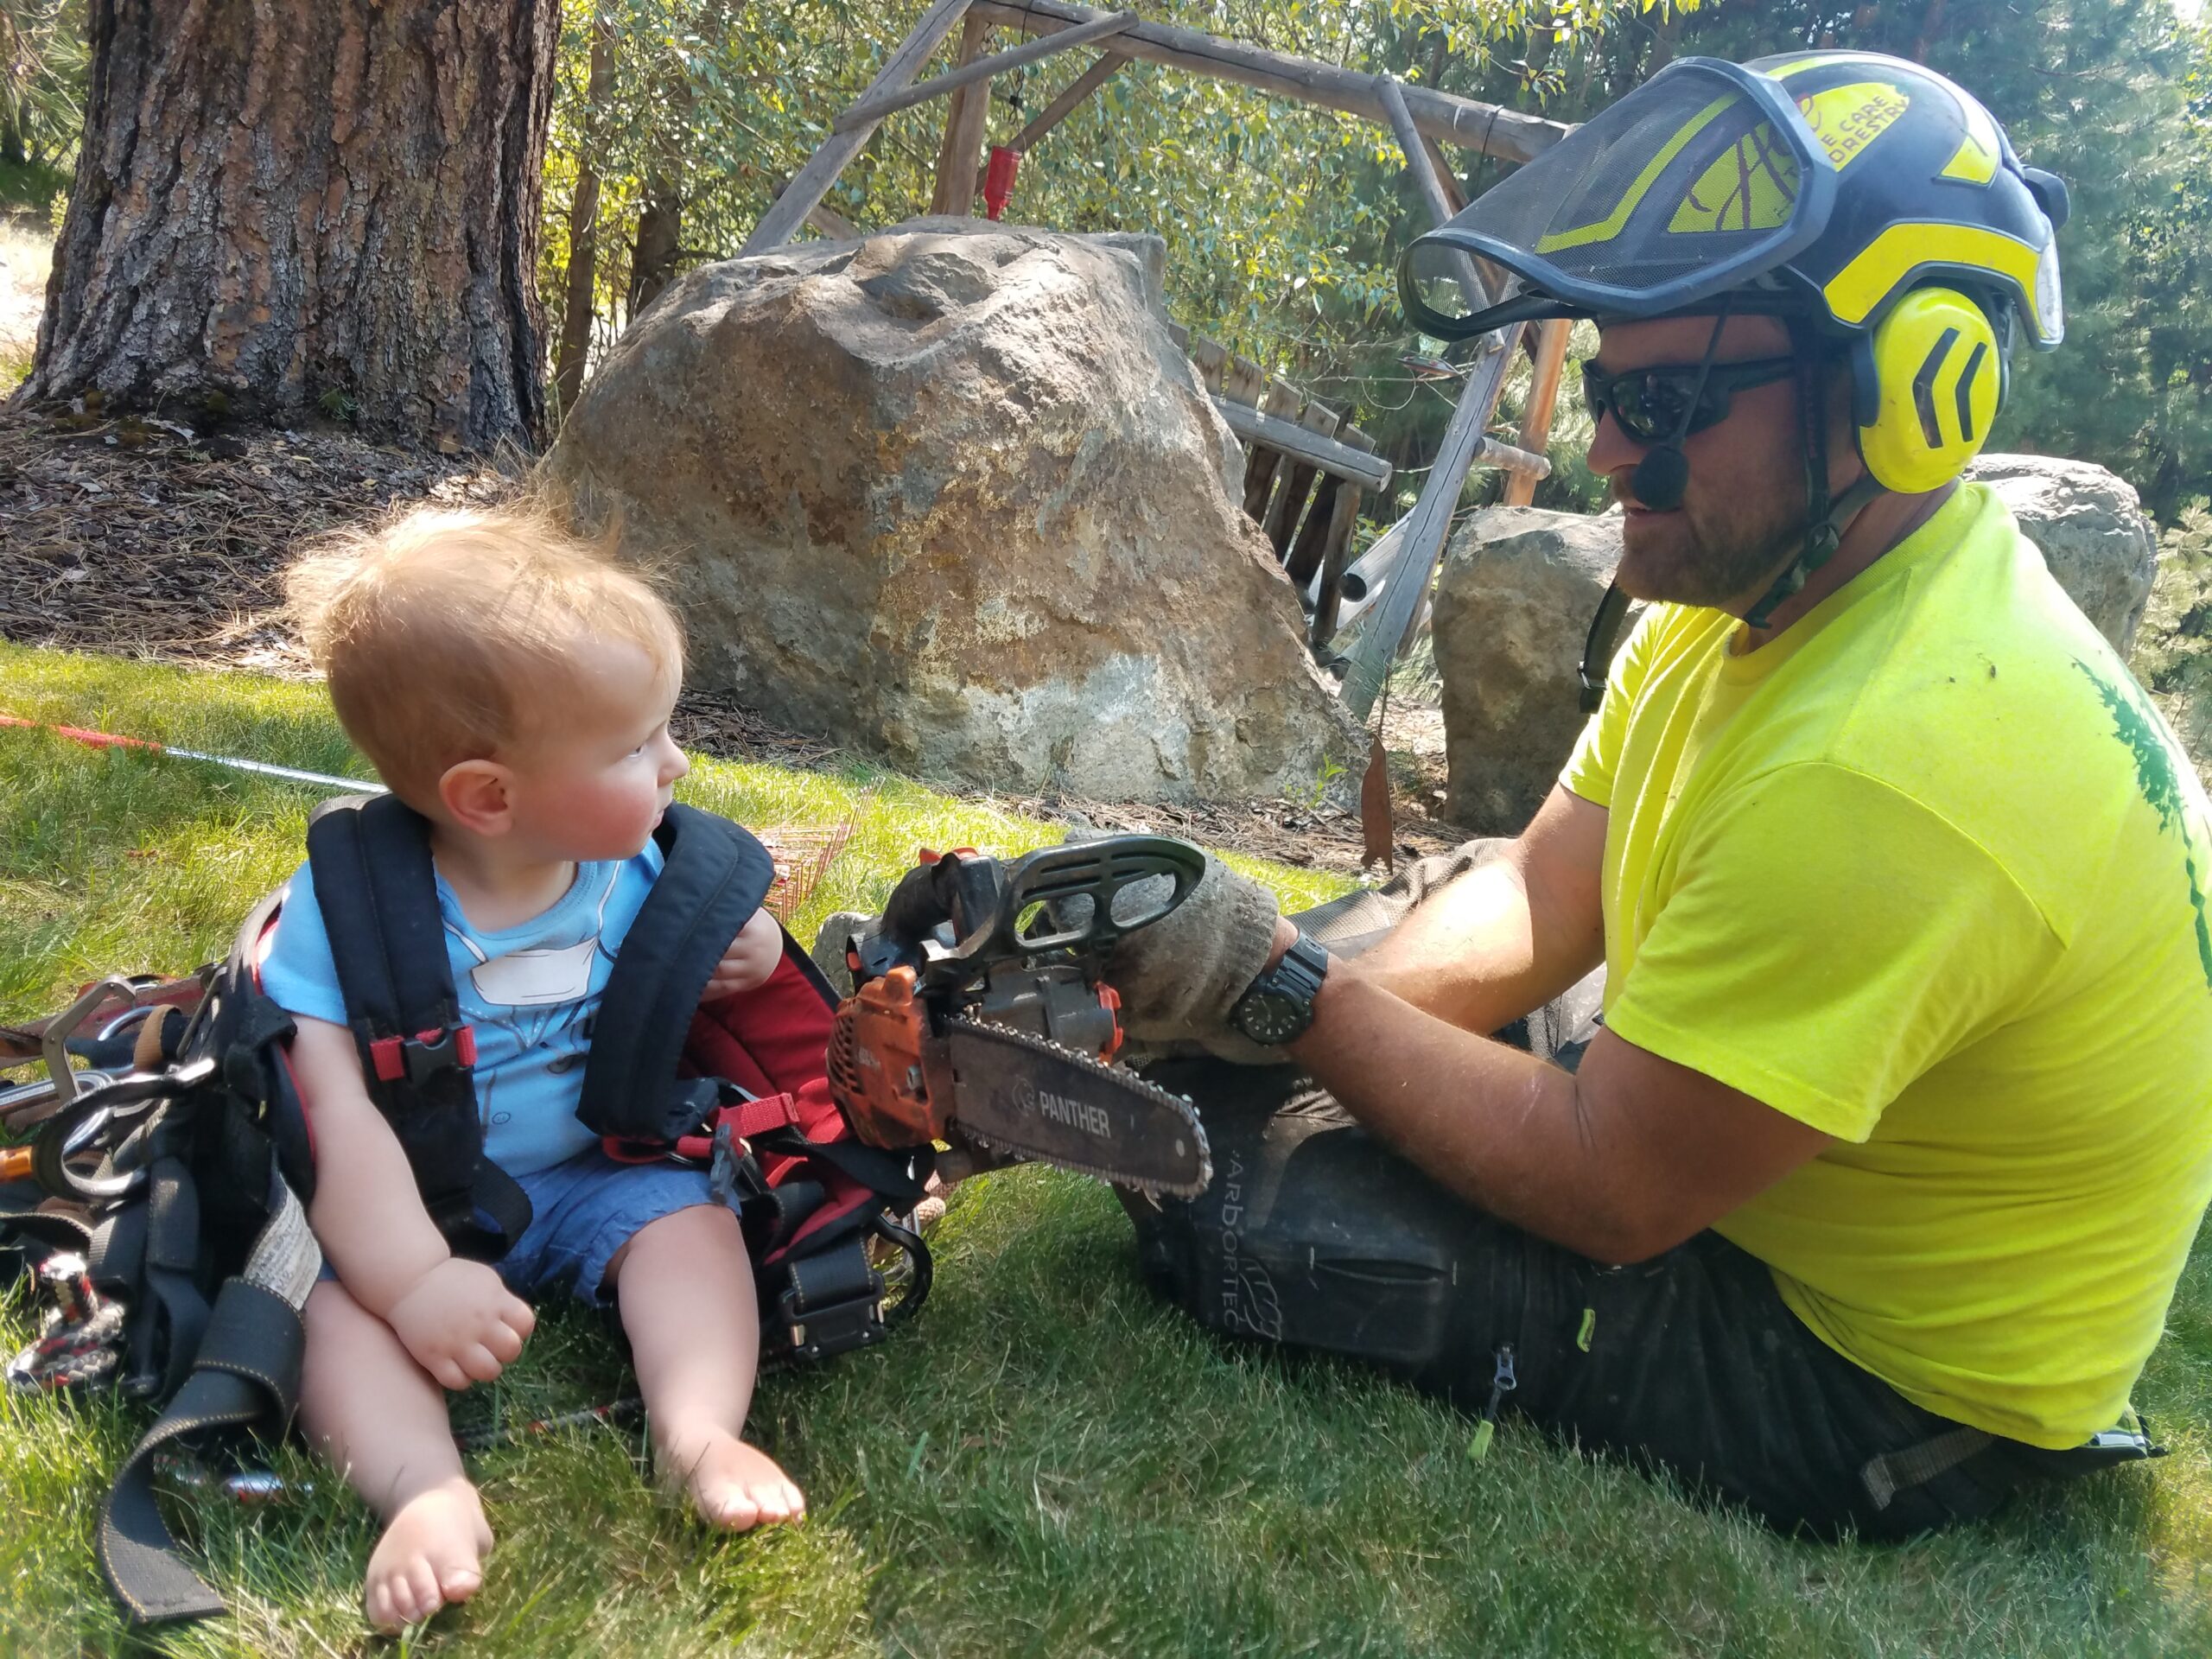 A Day In The Life: Climbing Arborist